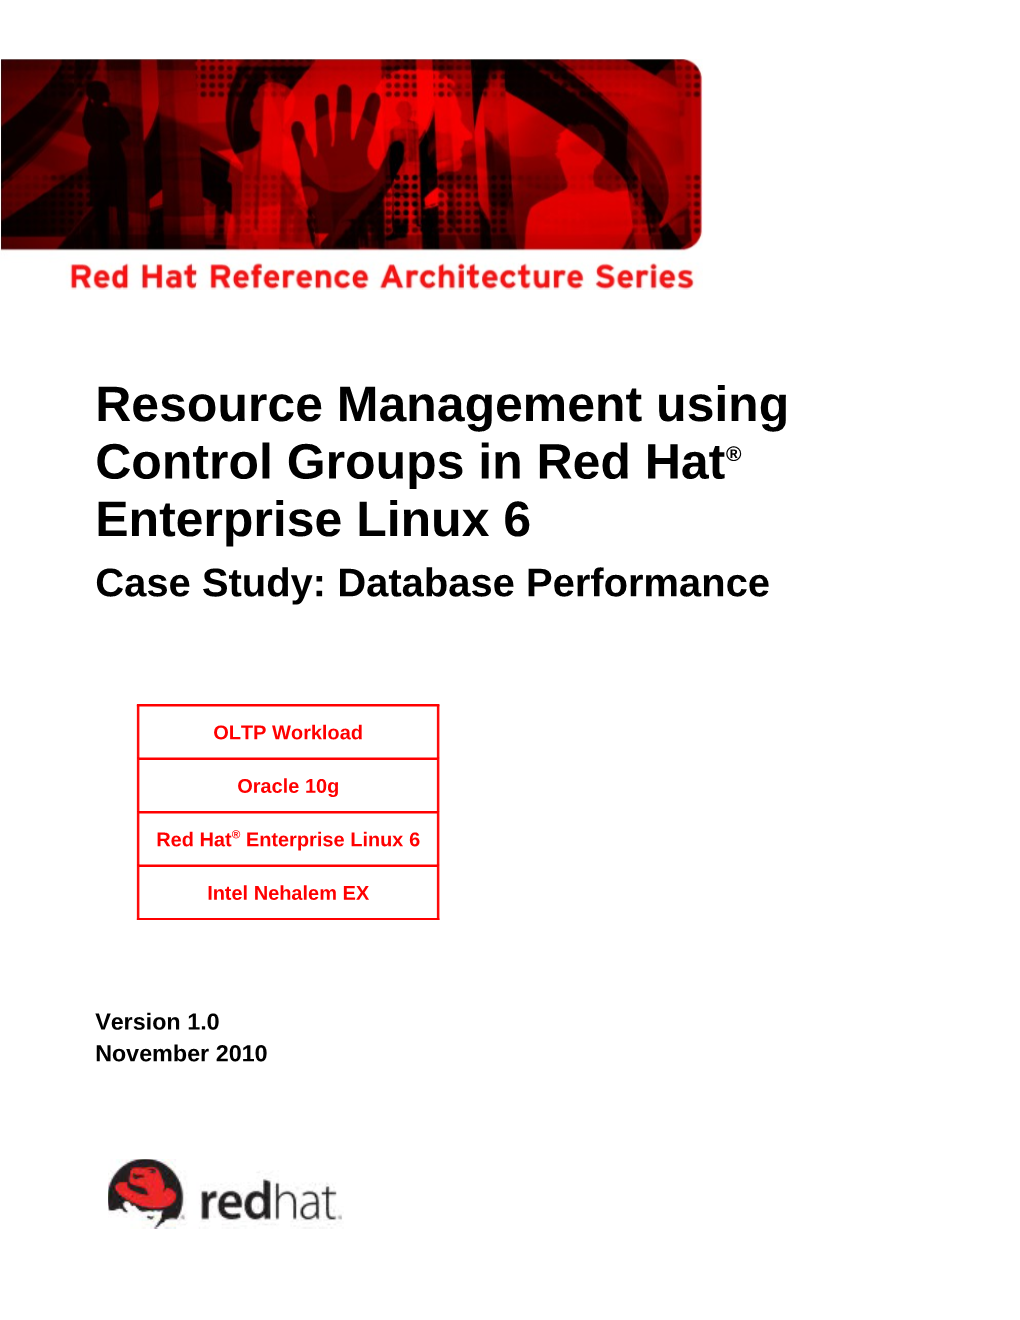 Resource Management Using Control Groups in Red Hat® Enterprise Linux 6 Case Study: Database Performance